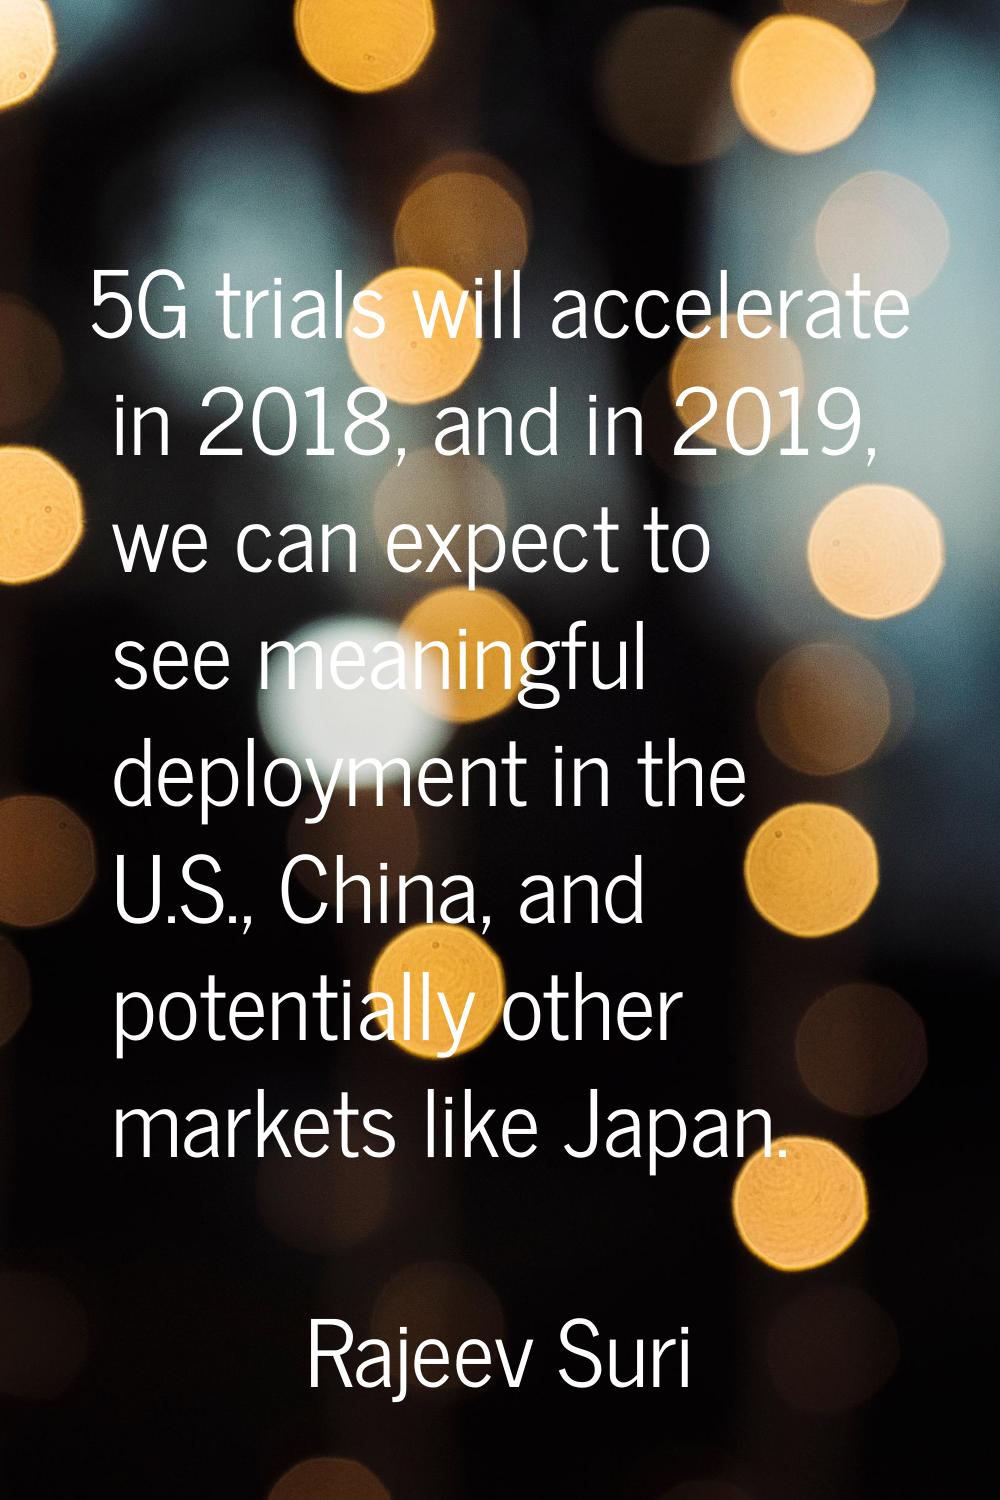 5G trials will accelerate in 2018, and in 2019, we can expect to see meaningful deployment in the U